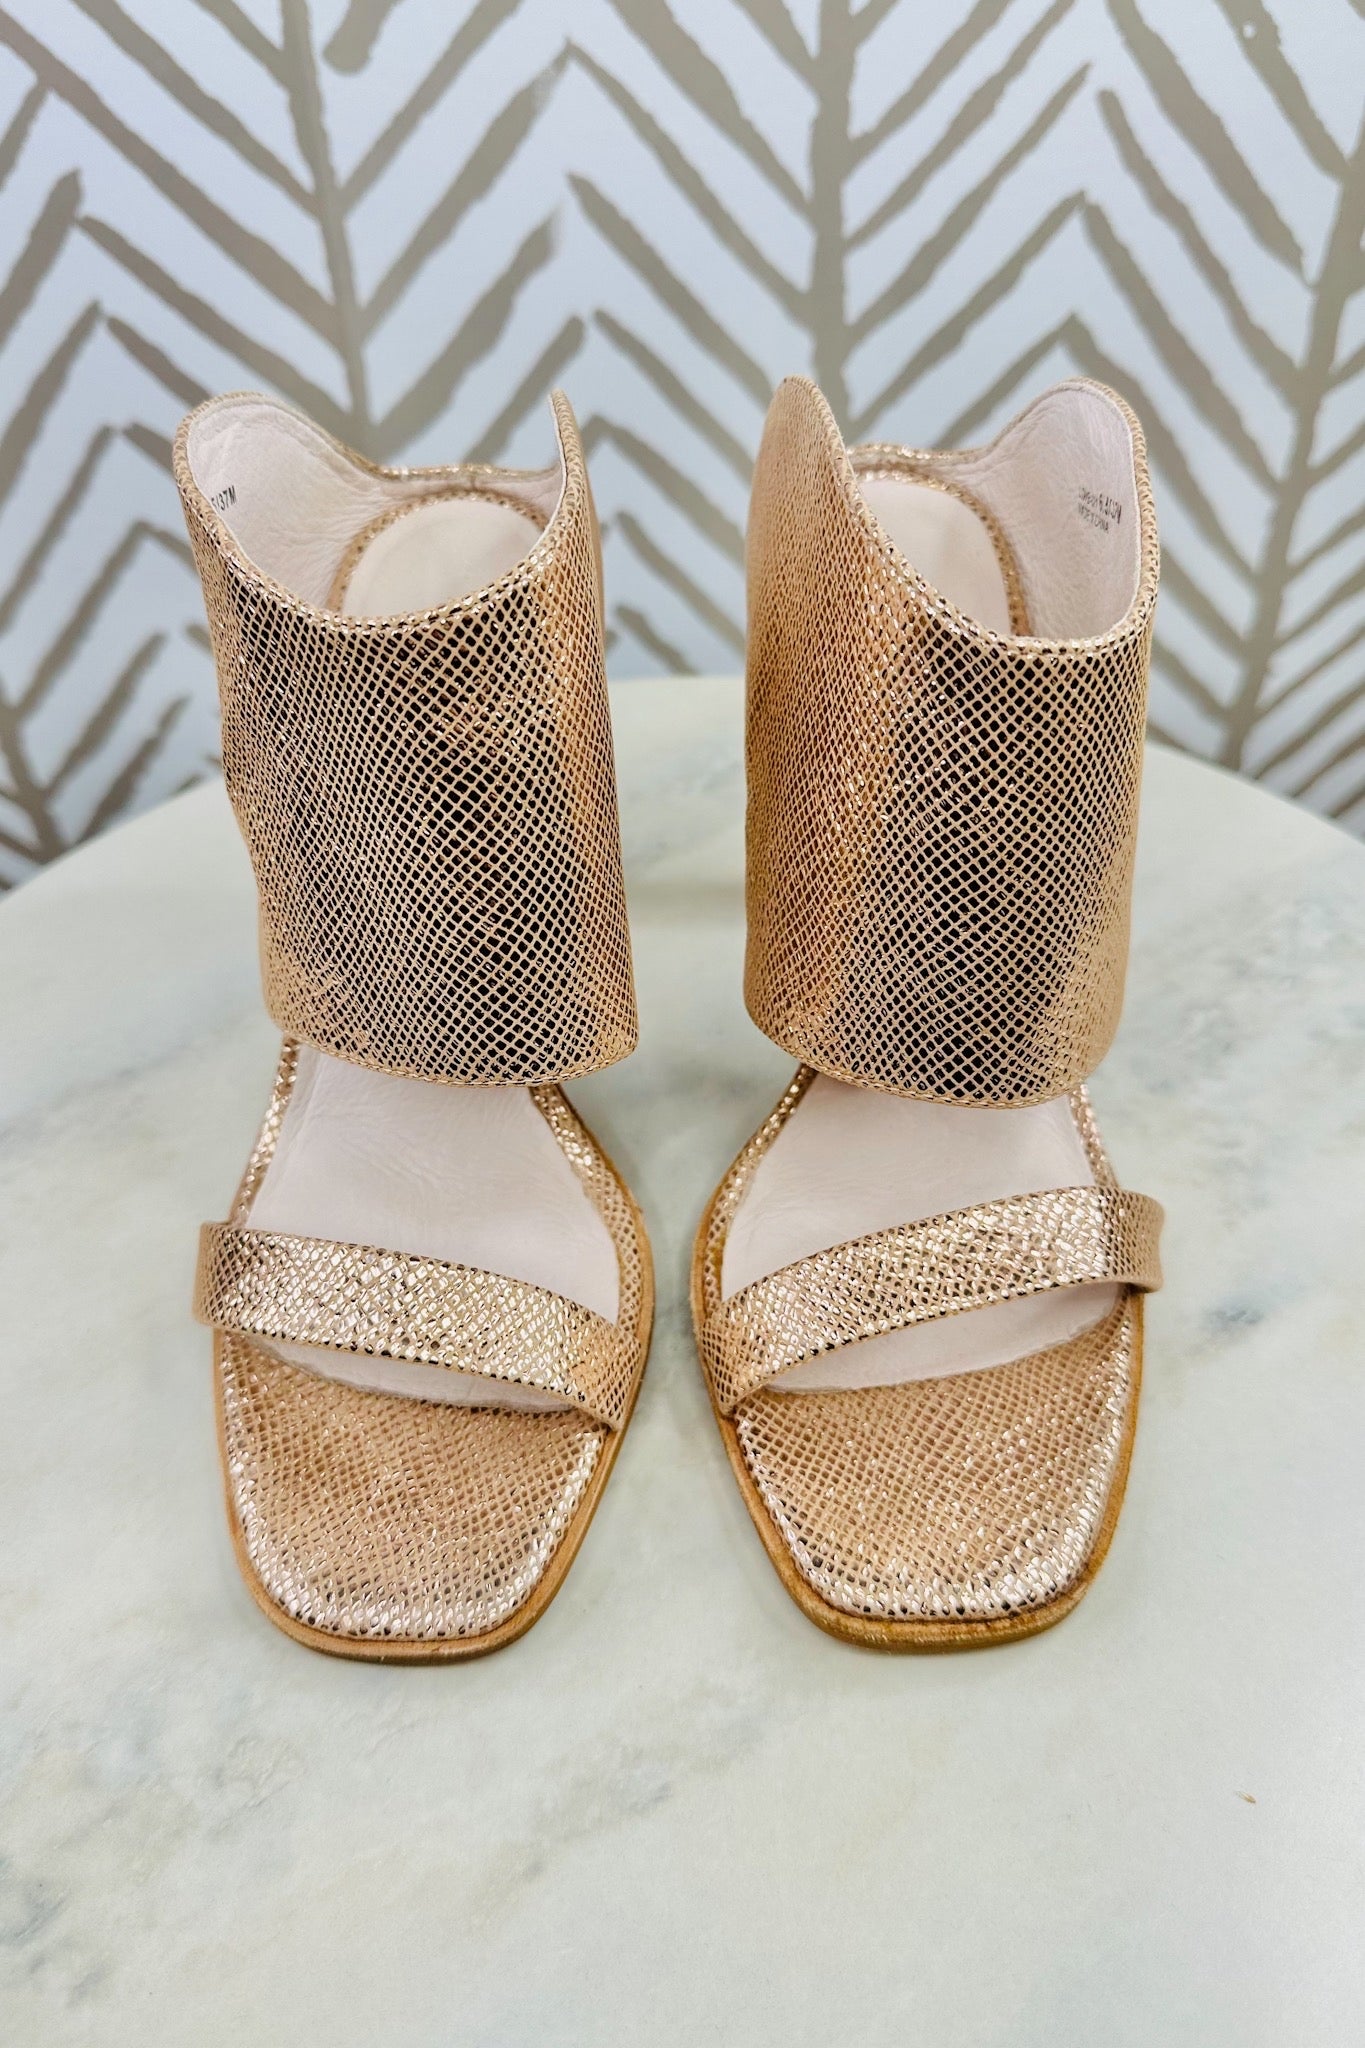 The Linx Textured Metallic Heels in Rose Gold by 42 Gold